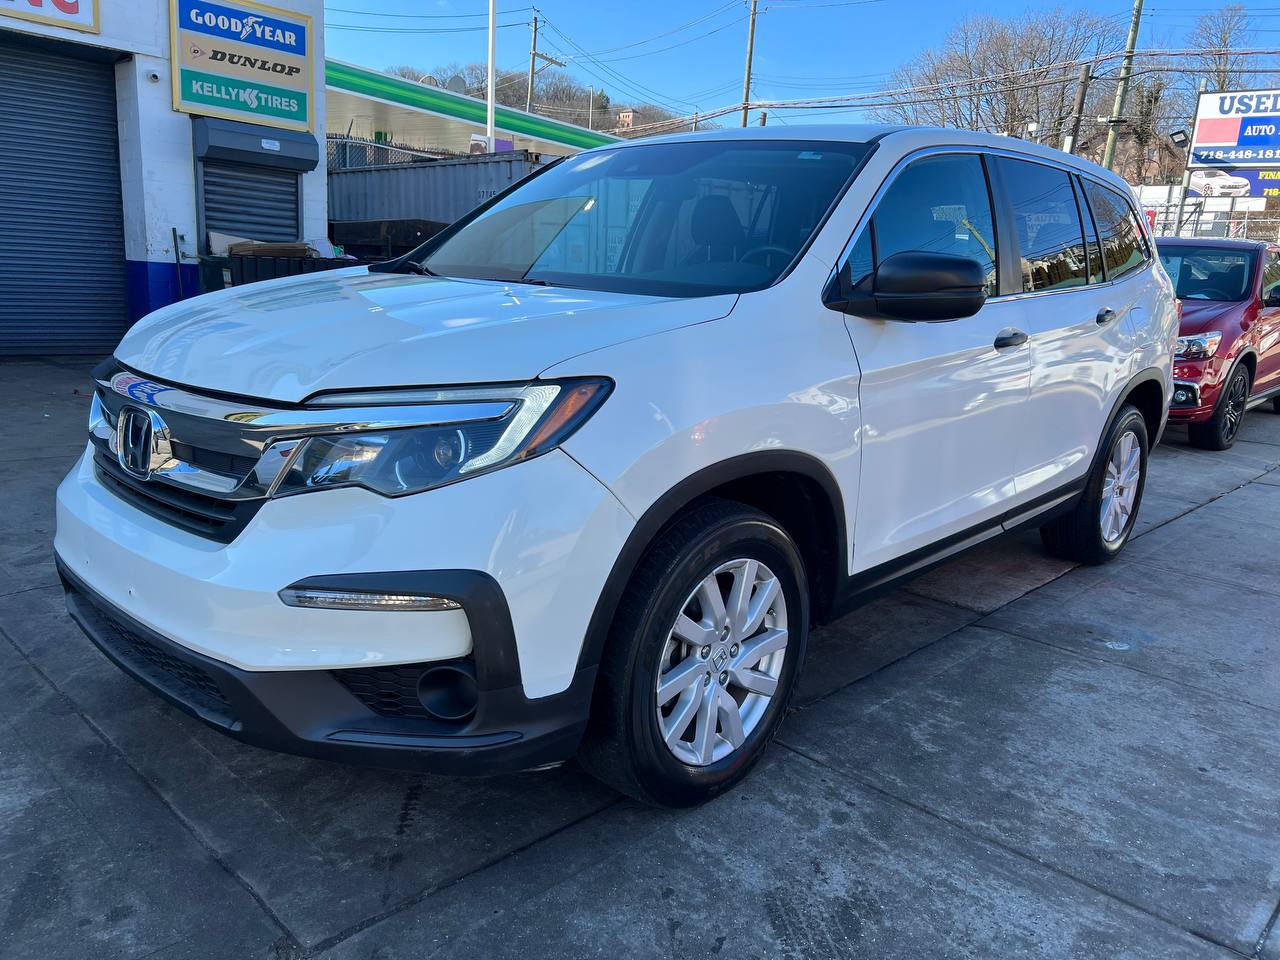 Used Car - 2019 Honda PILOT LX AWD for Sale in Staten Island, NY